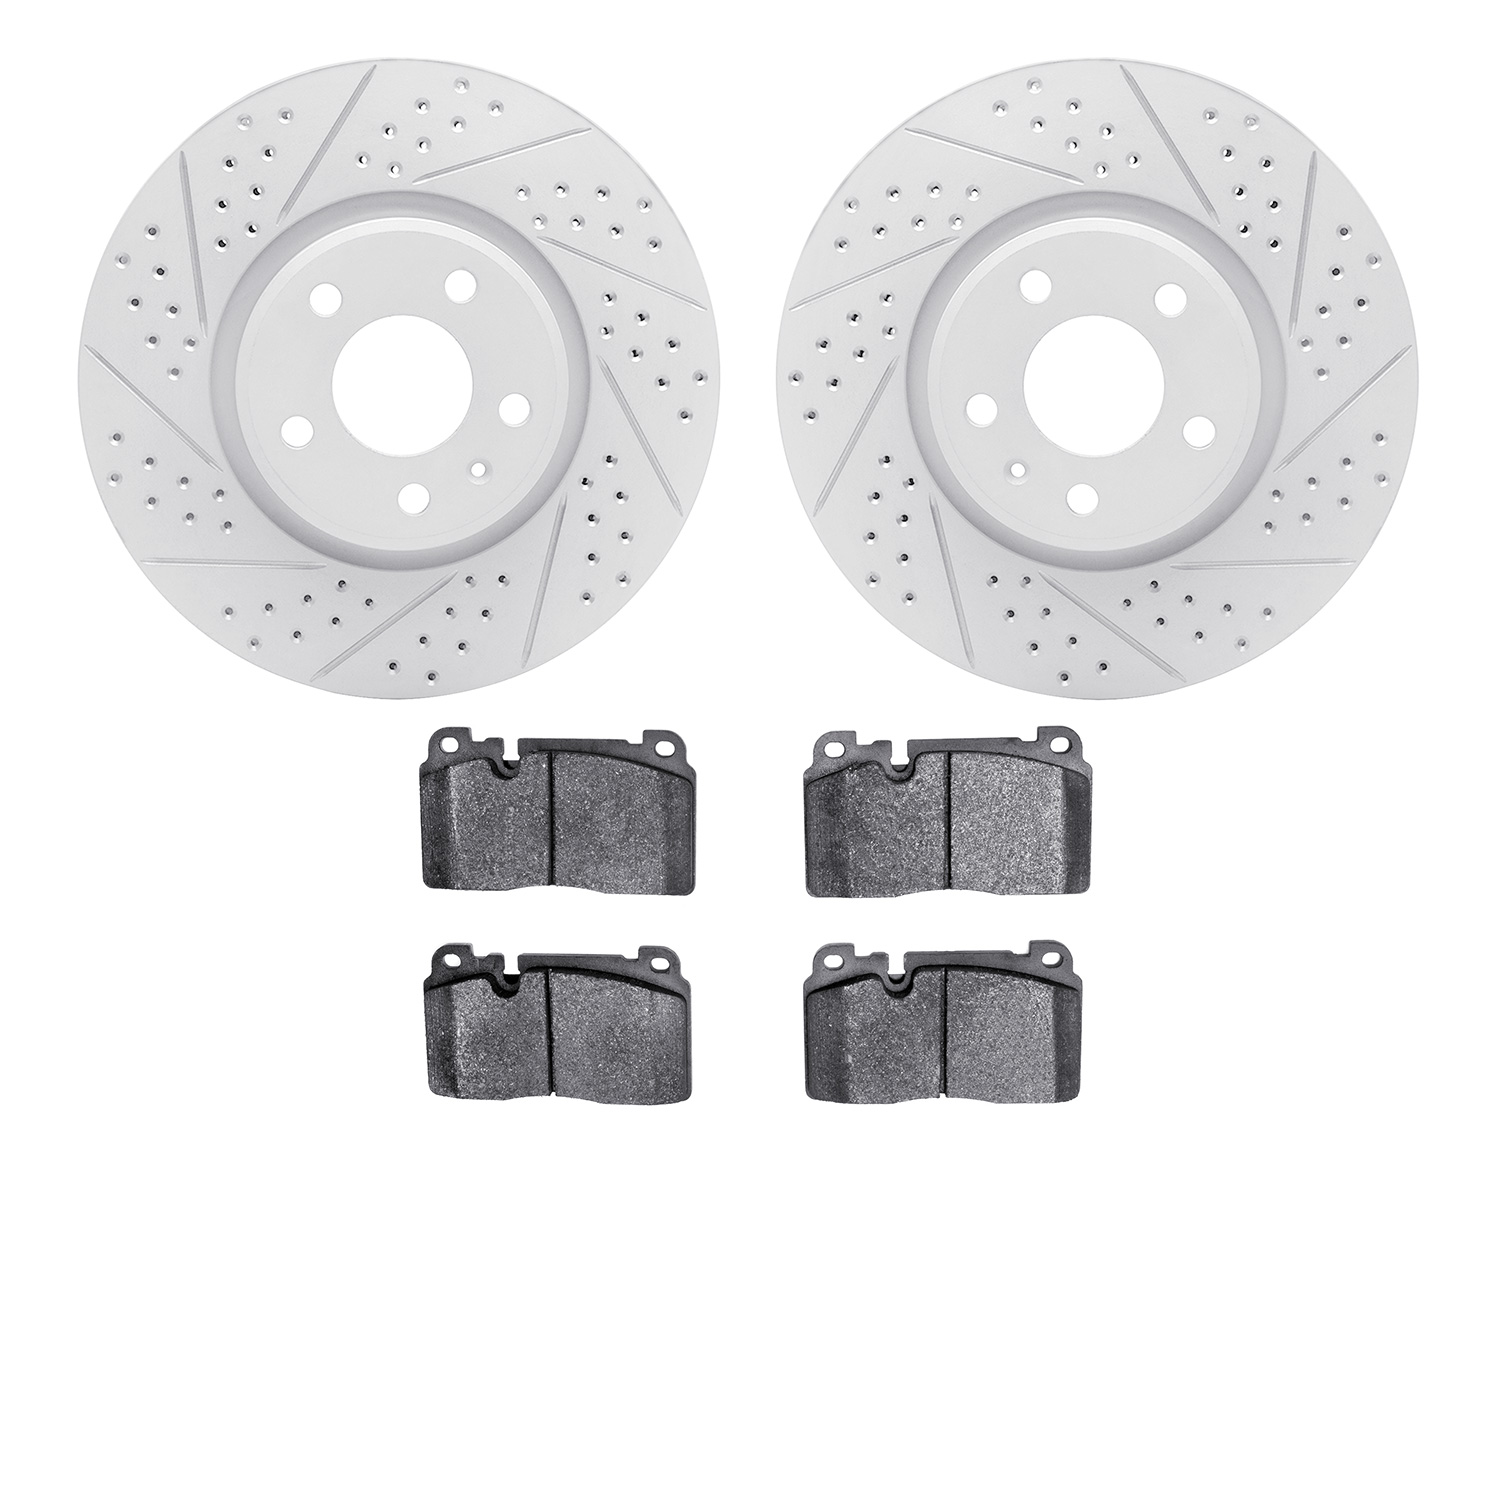 2502-73077 Geoperformance Drilled/Slotted Rotors w/5000 Advanced Brake Pads Kit, 2013-2017 Audi/Volkswagen, Position: Front